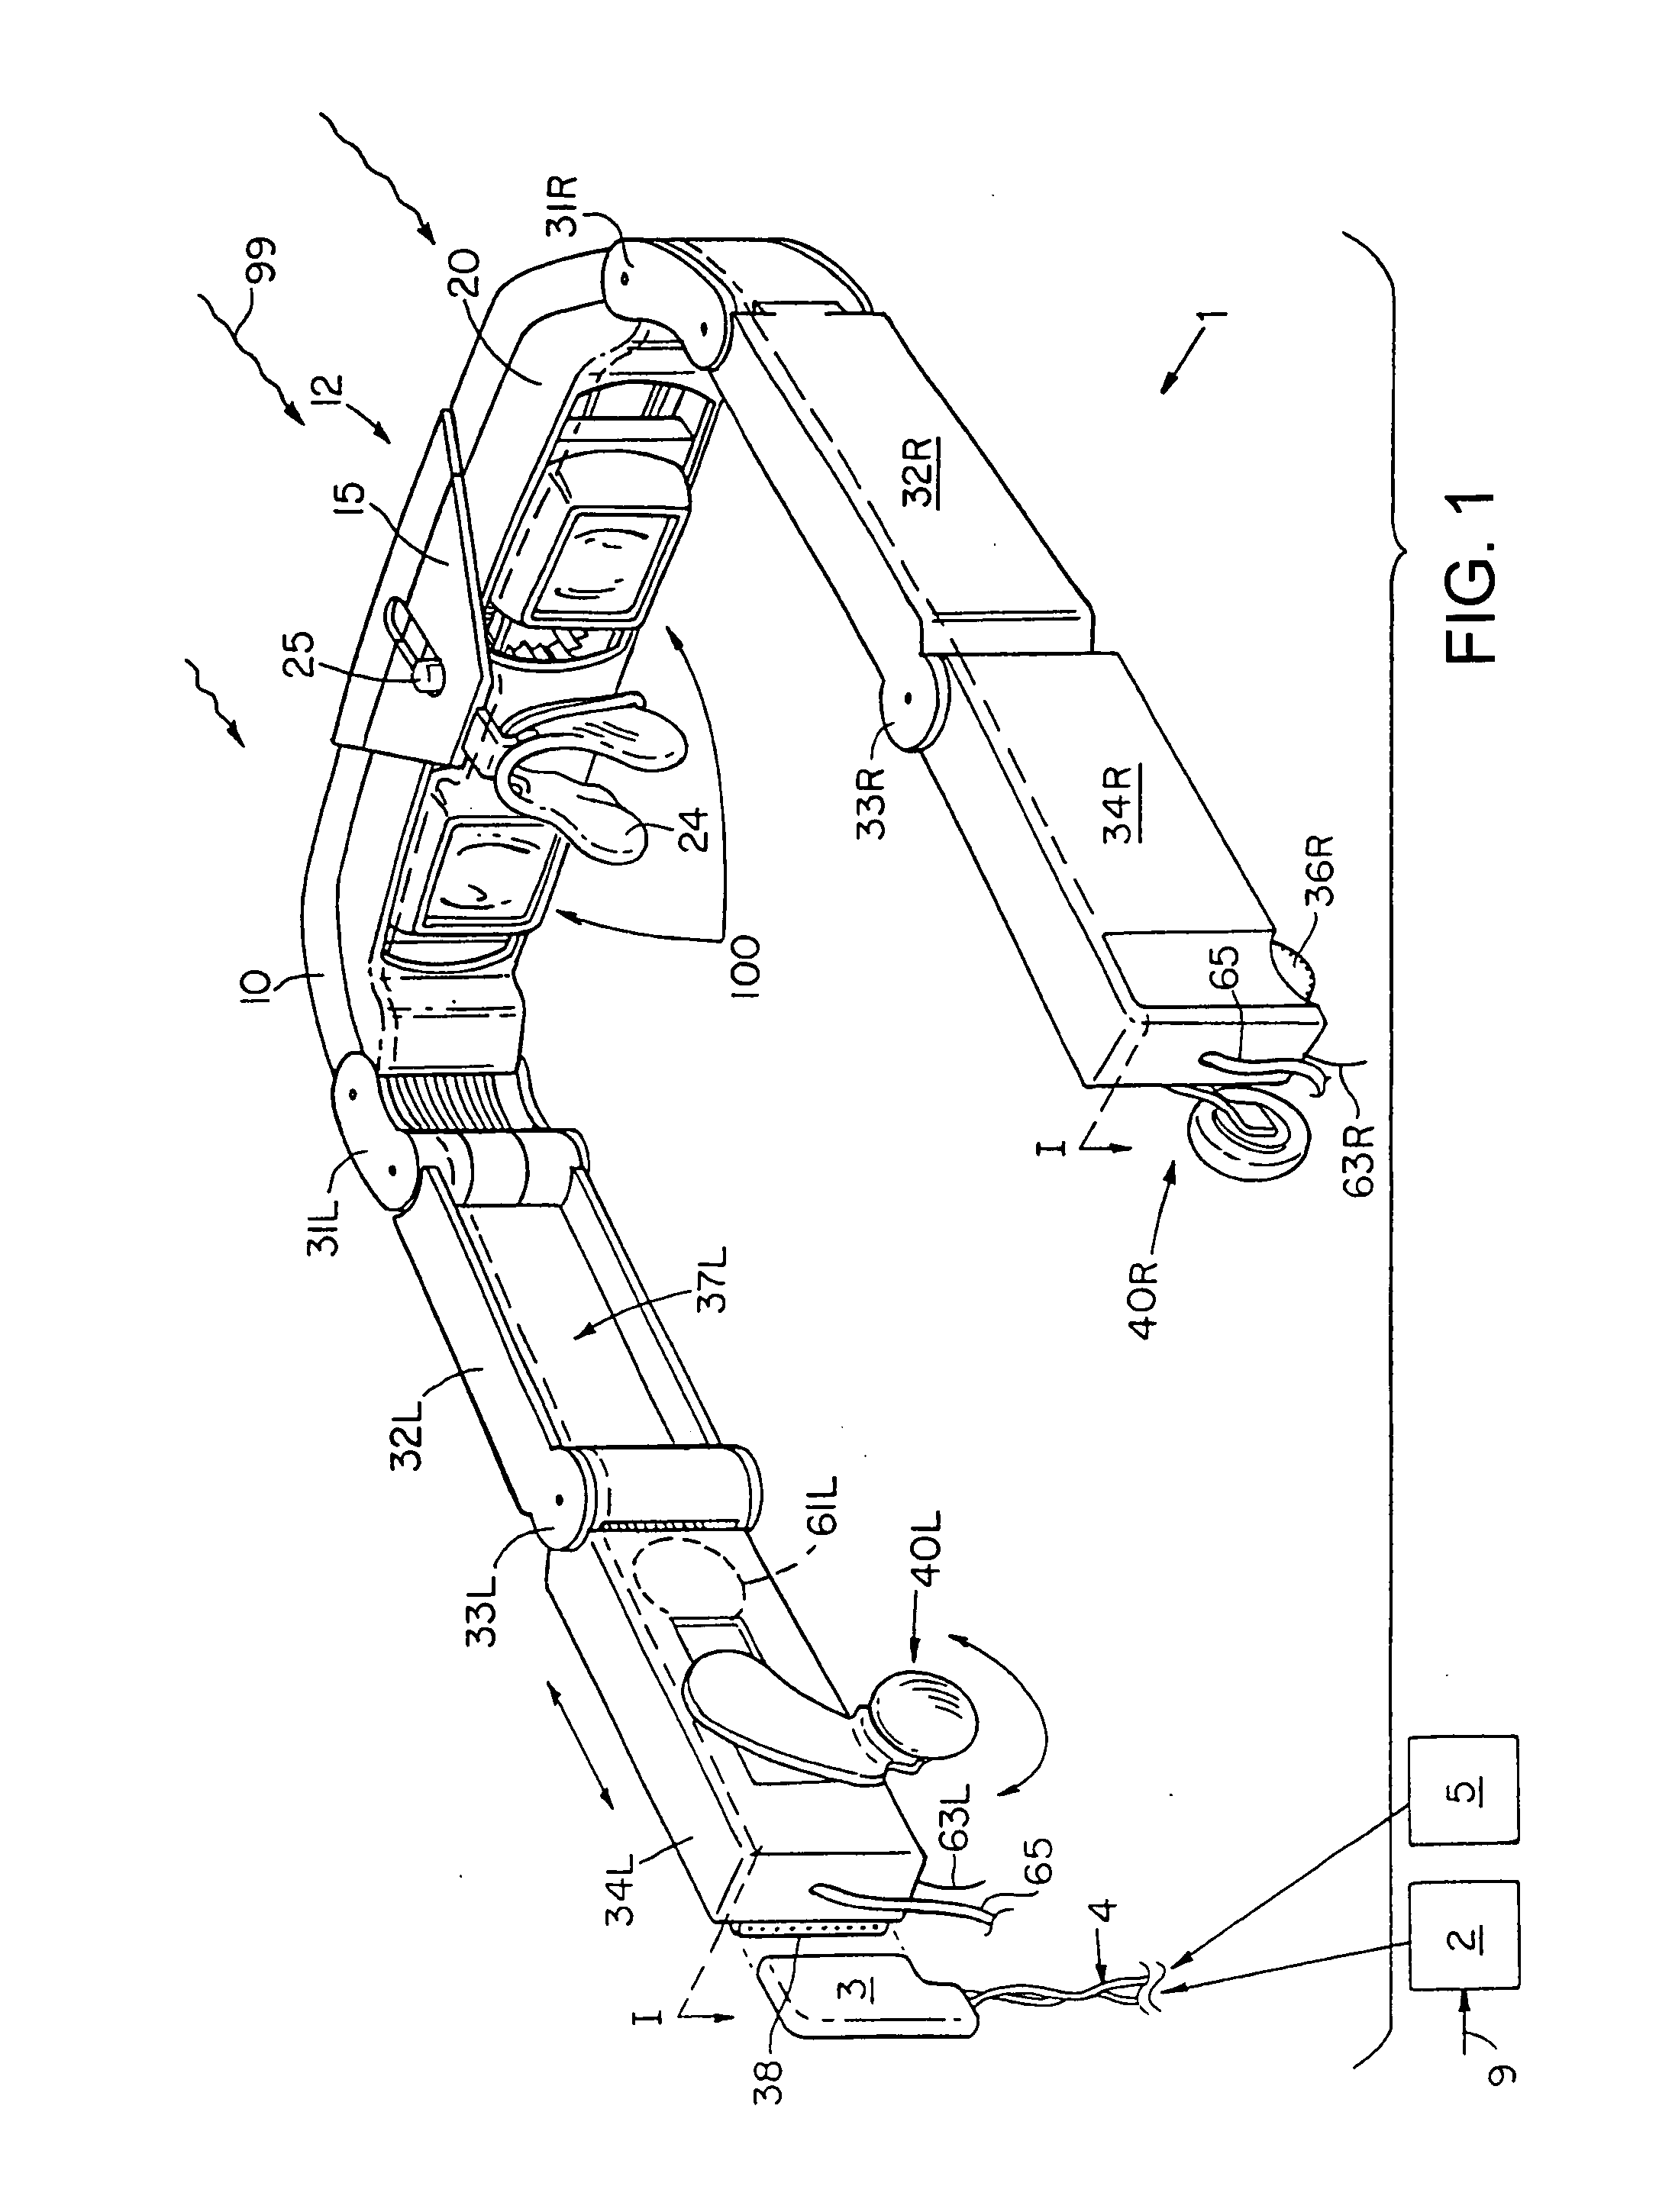 Portable communication display device